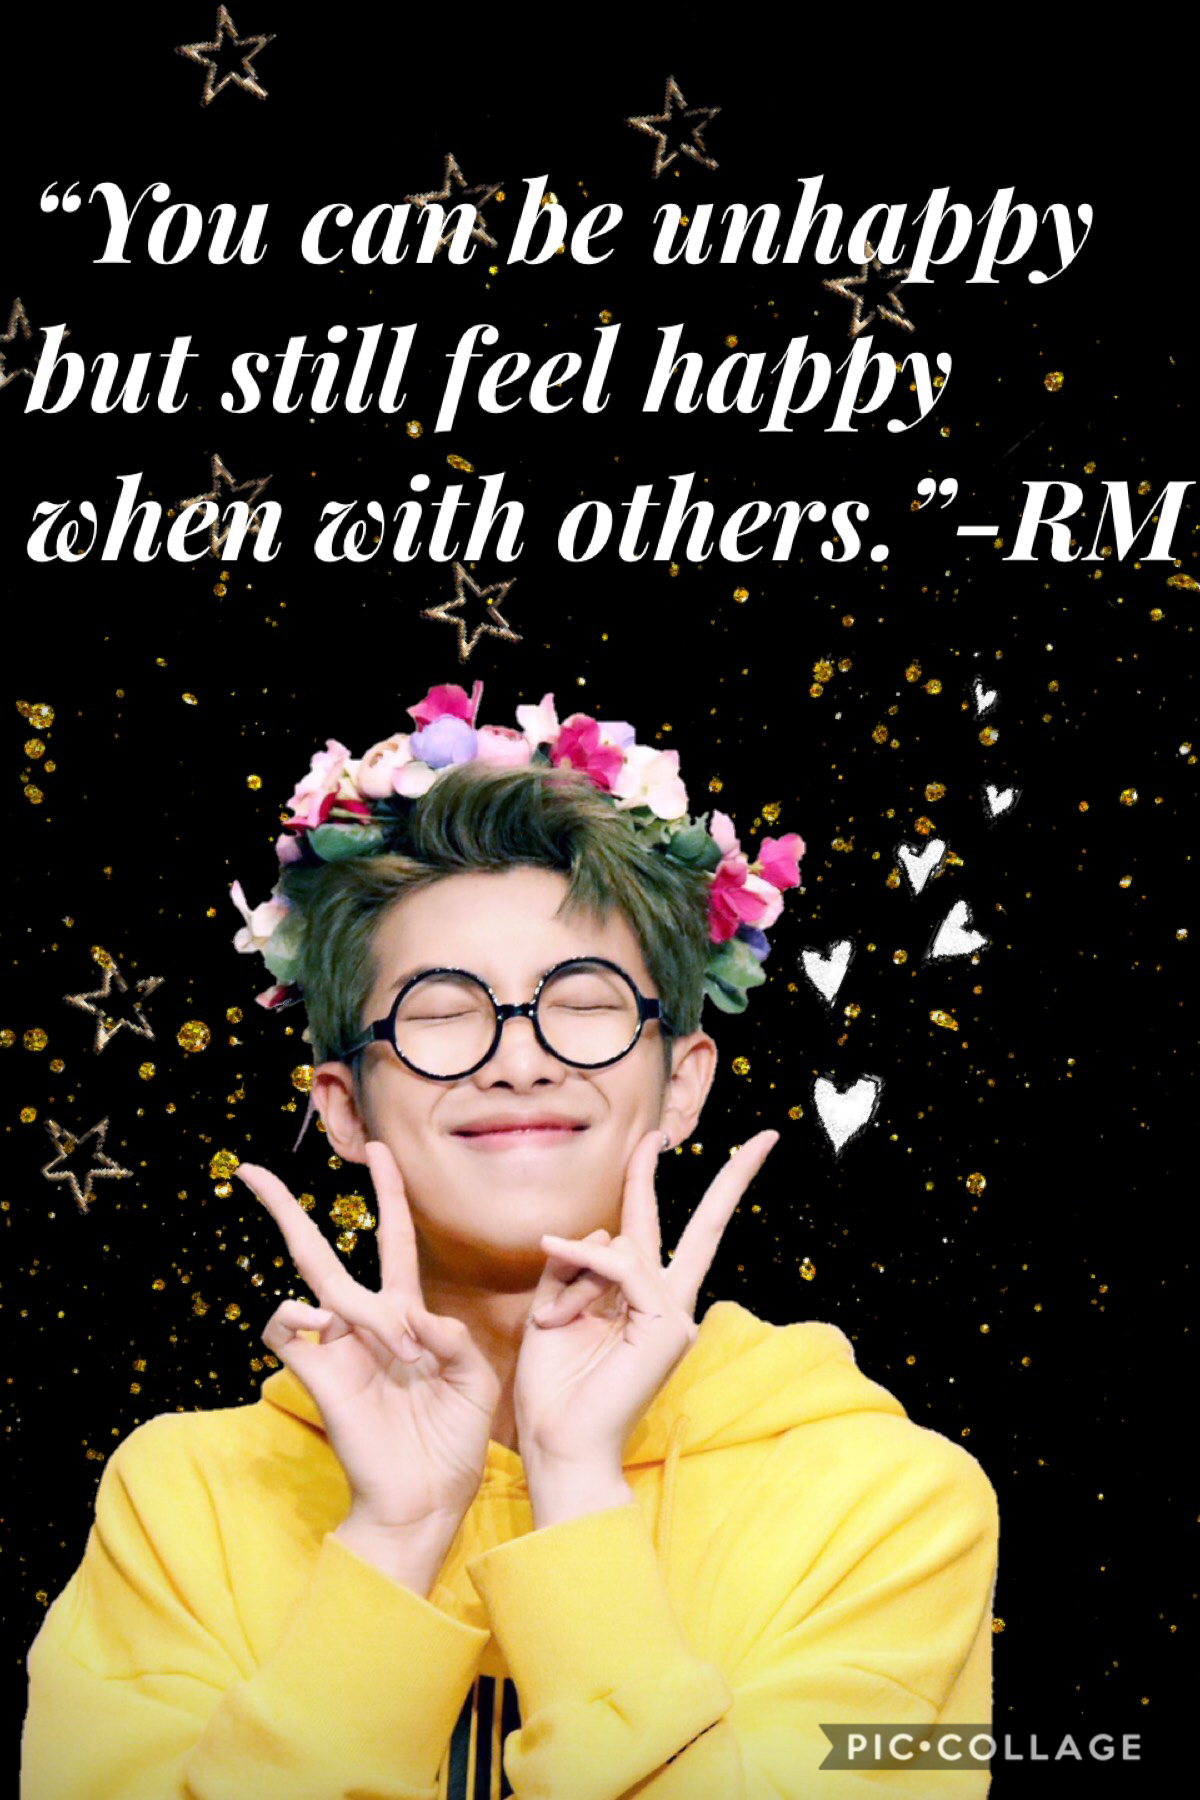 “You can be unhappy but still feel happy when with others.”-RM